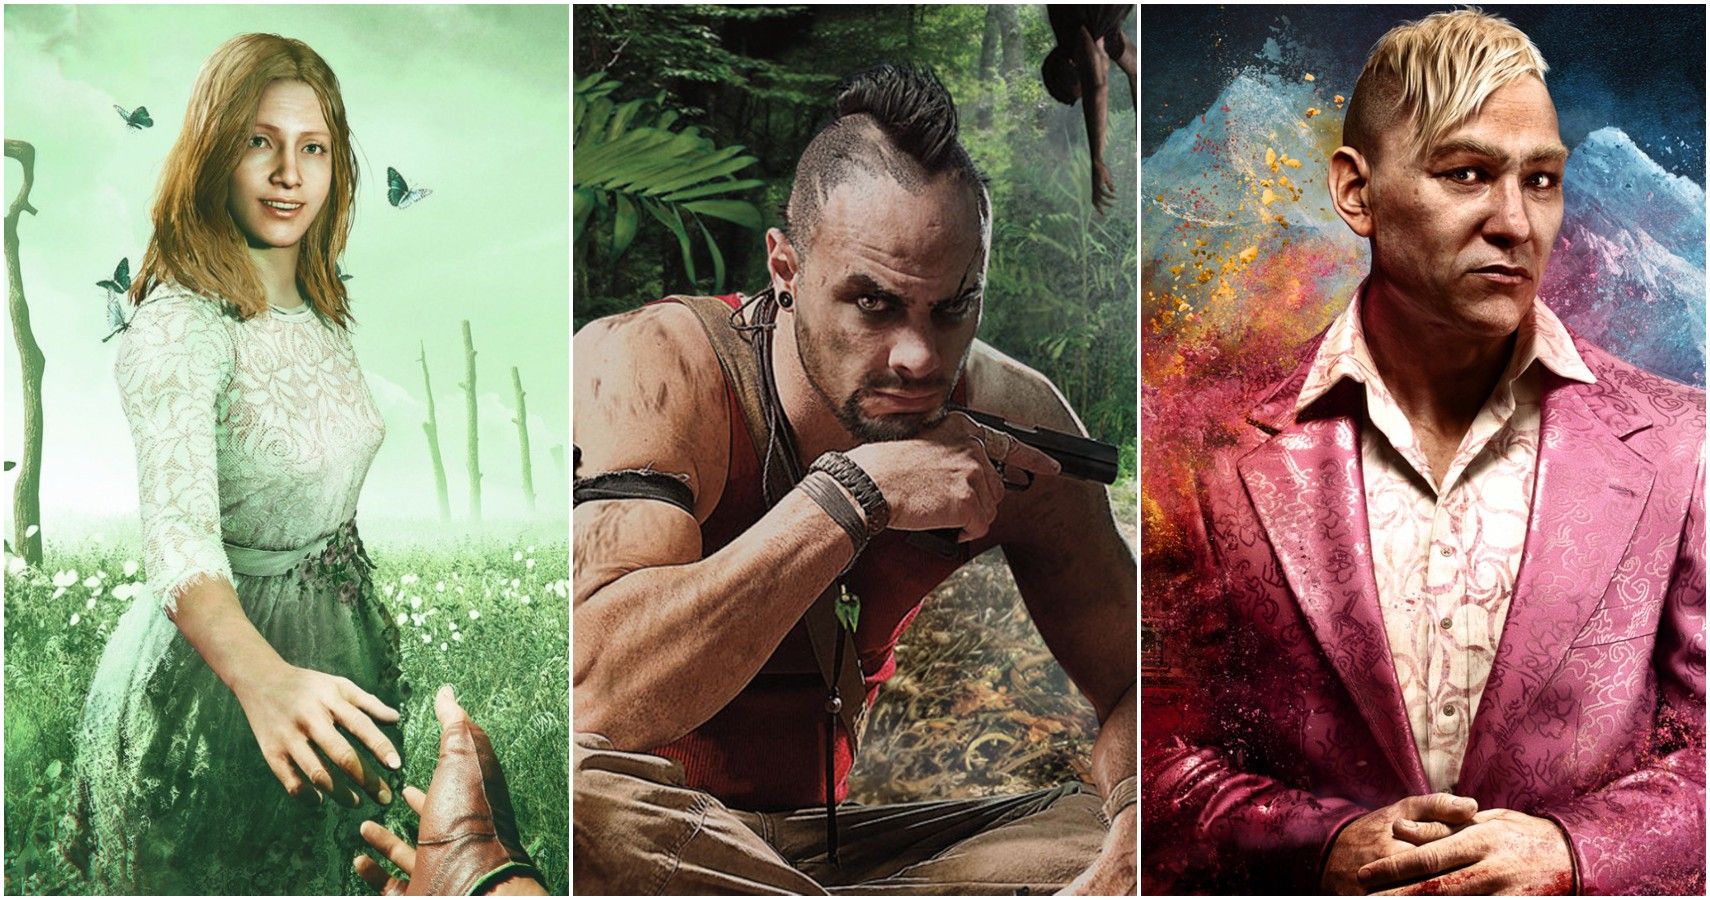 Far Cry Games Ranked Worst To Best (According To Metacritic User Reviews)